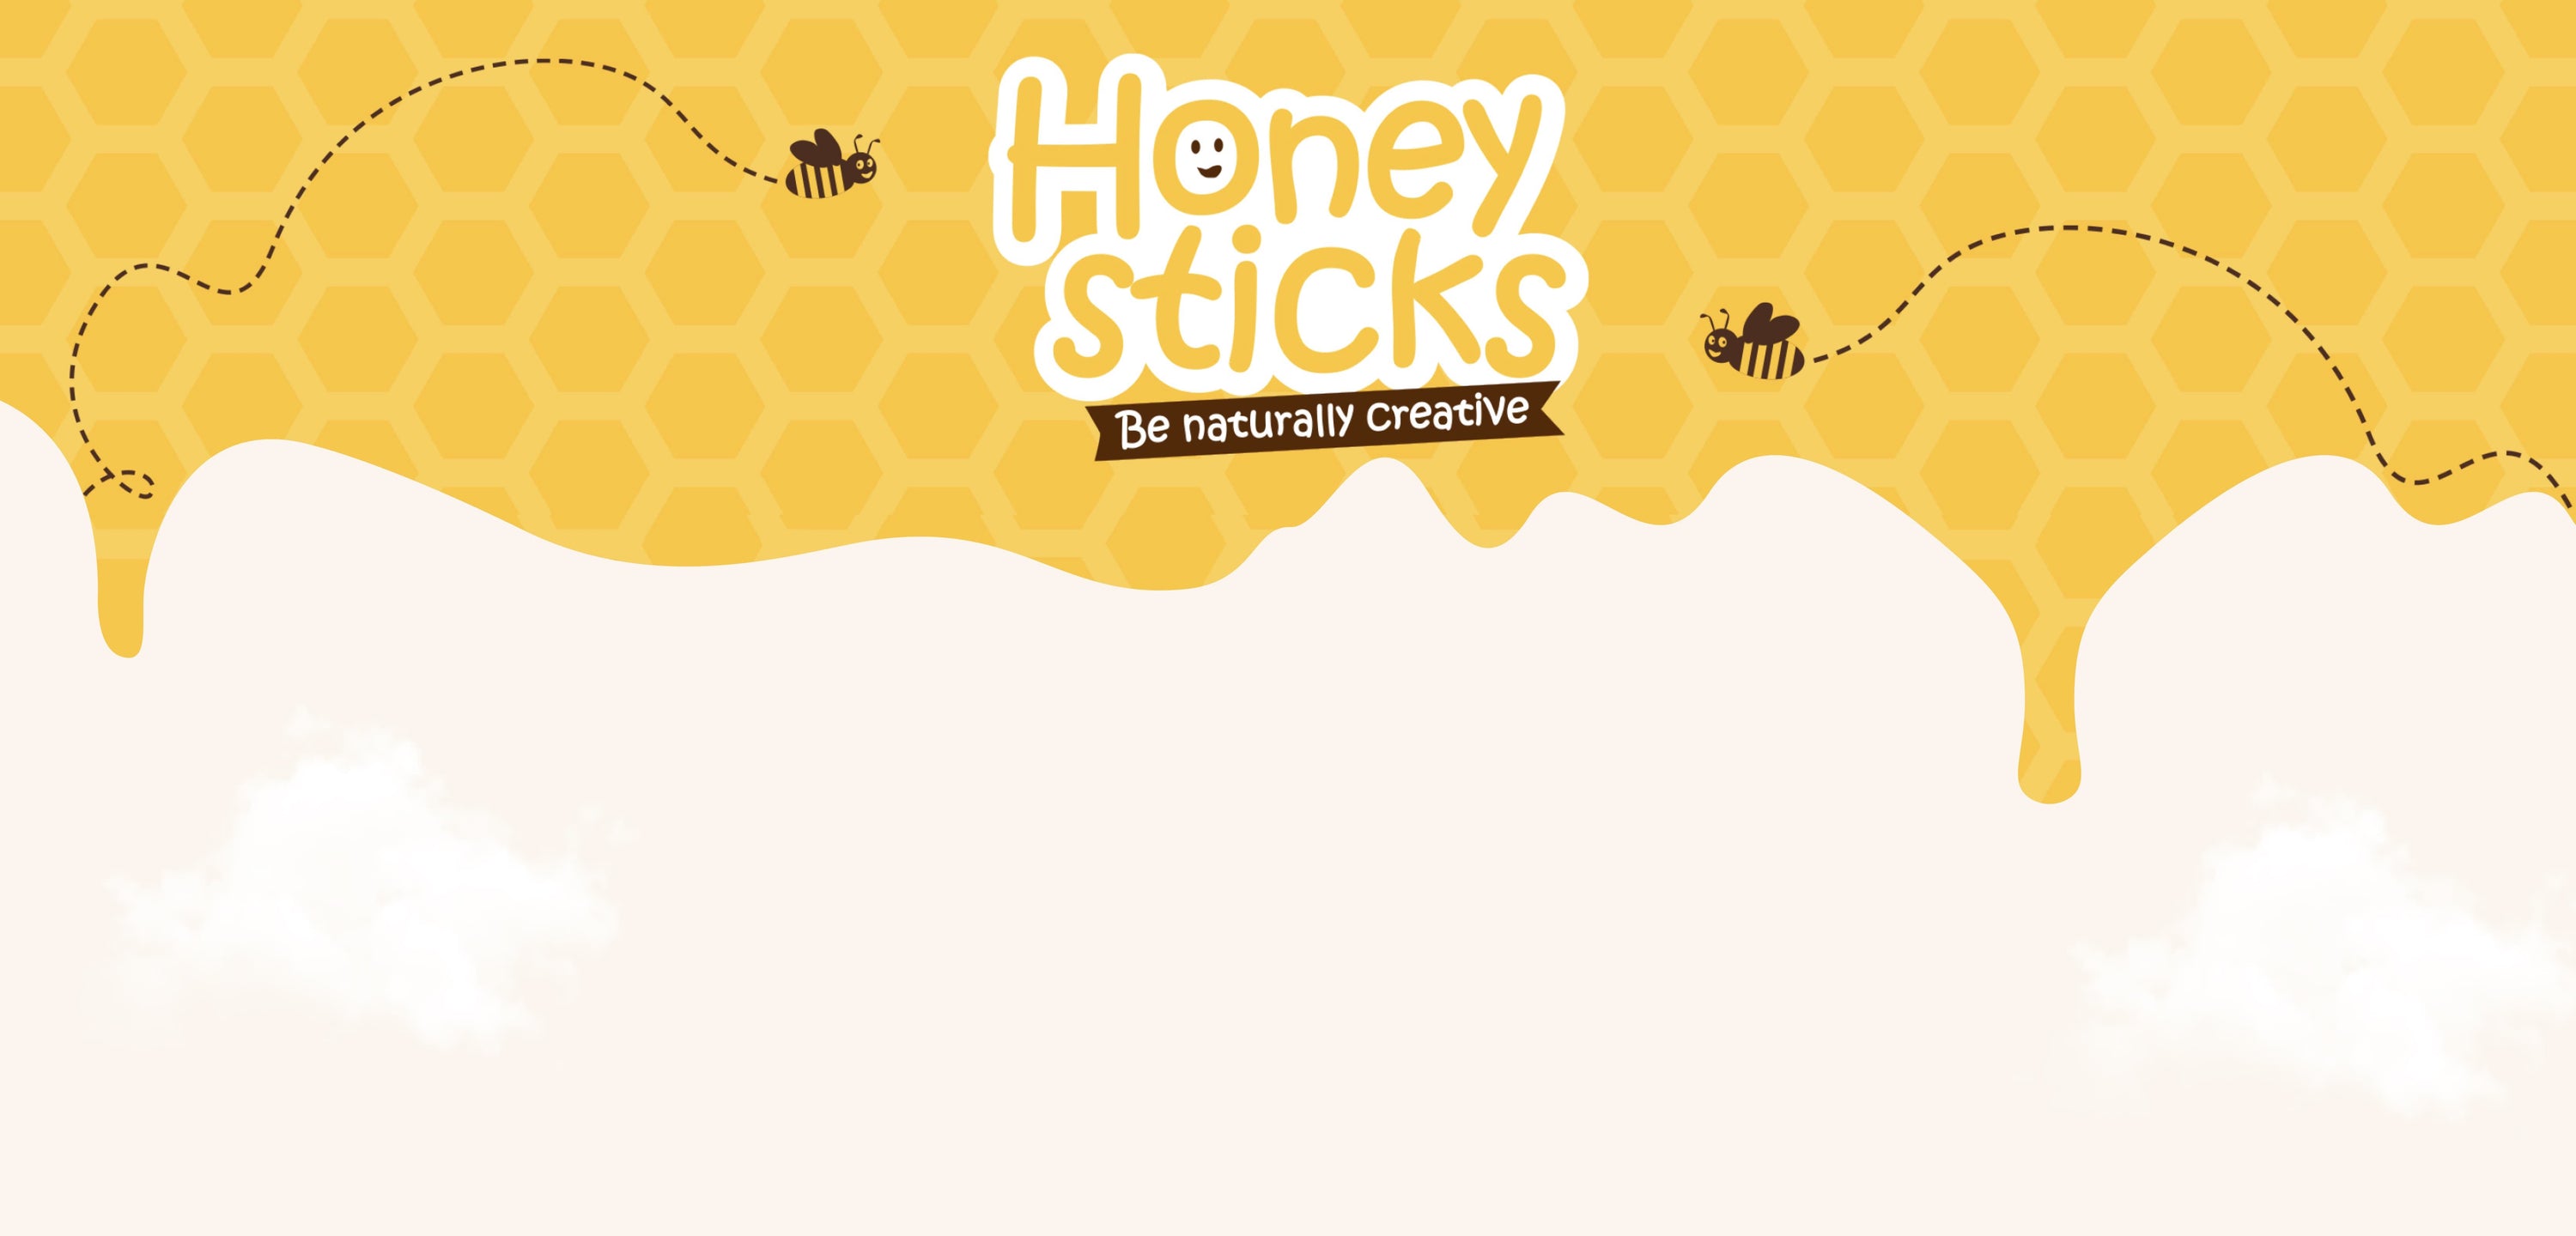 Honeysticks 100% Pure Beeswax Crayons (12 Pack) - Non Toxic Crayons  Handmade with Pure Beeswax and Food Grade Colours - Child/Toddler Safe,  Easy to Hold and Use…